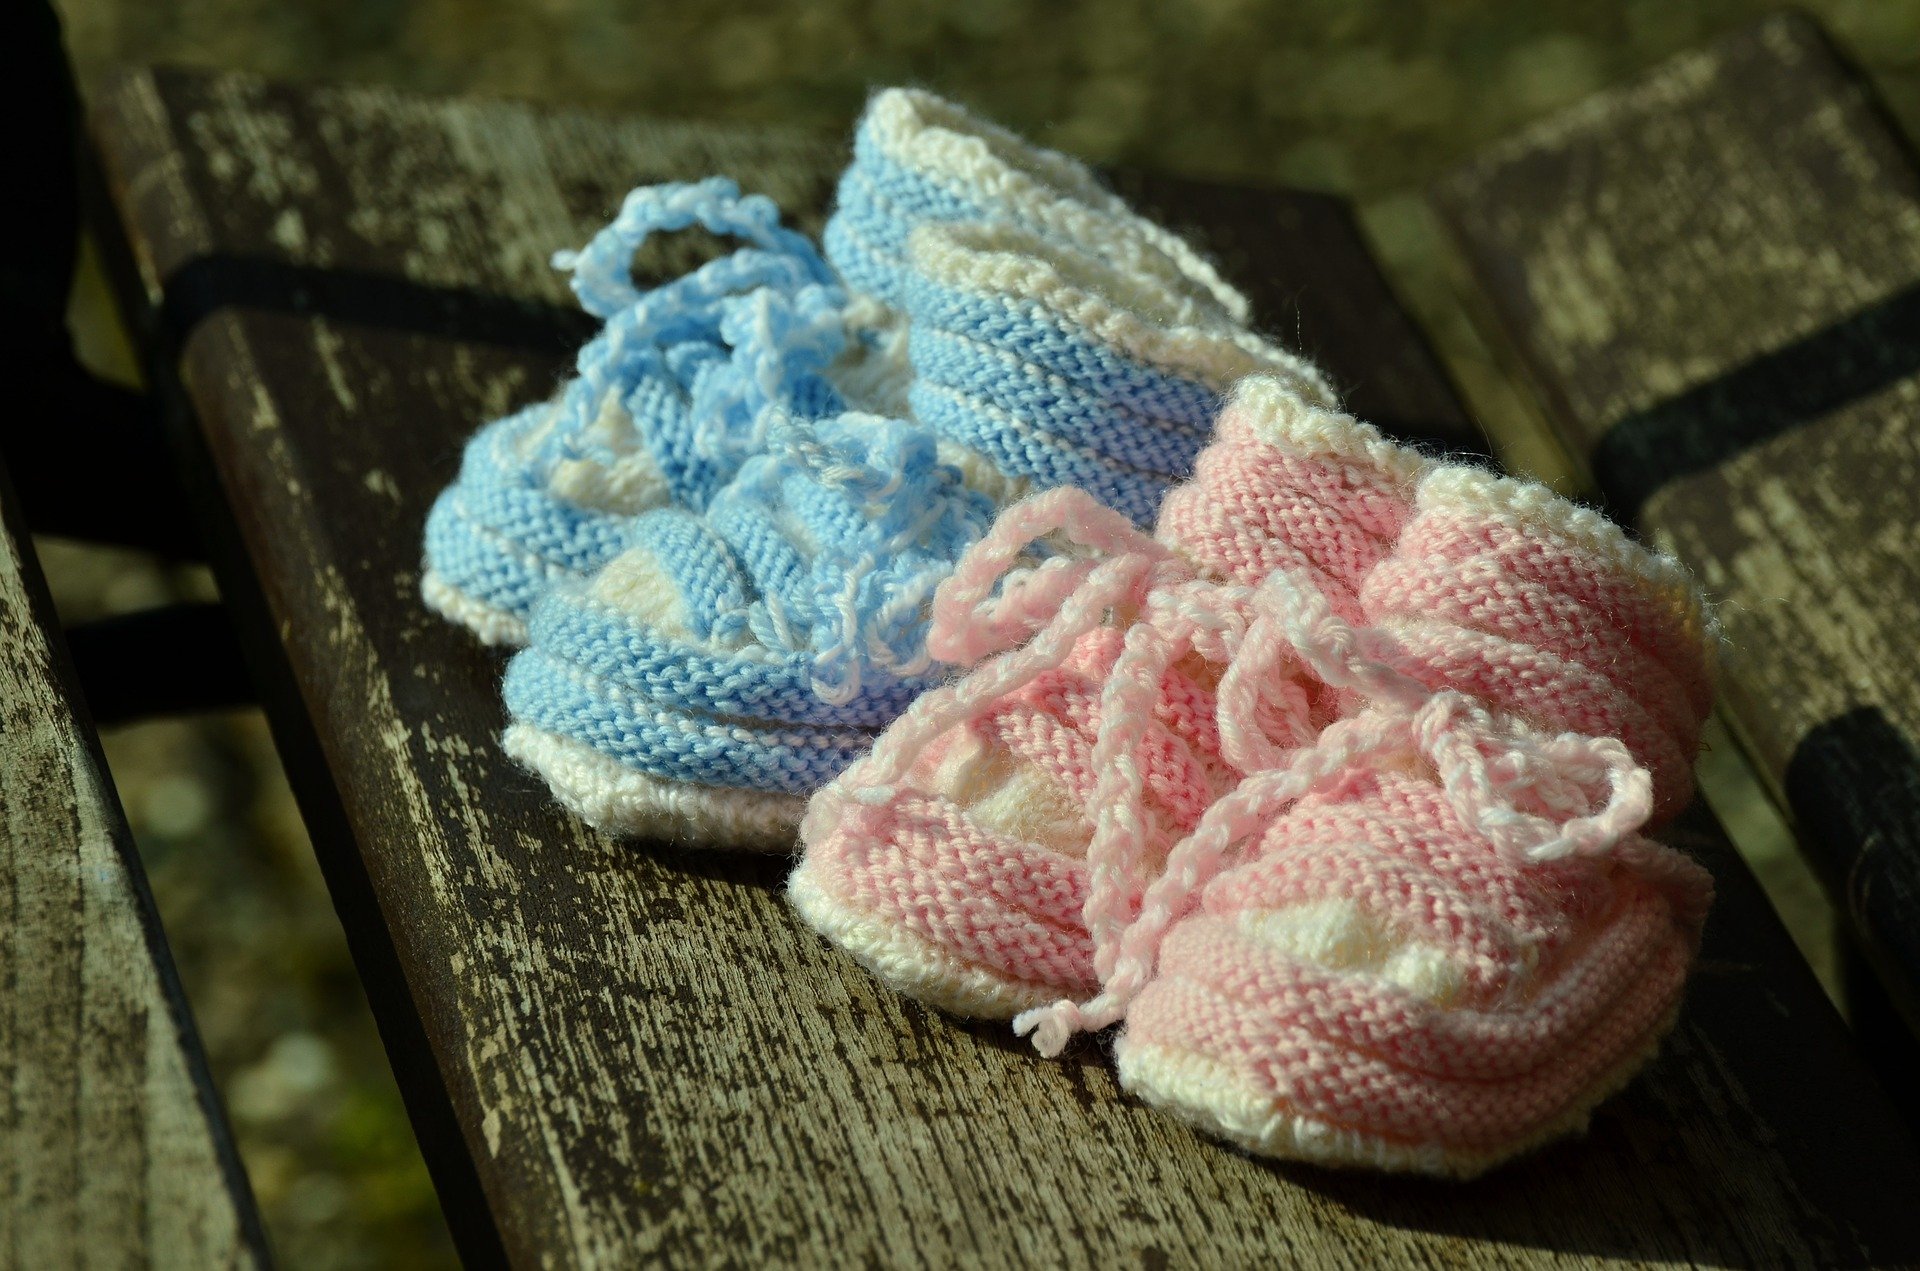 Pink and blue baby shoes for a boy and a girl | Source: Pixabay